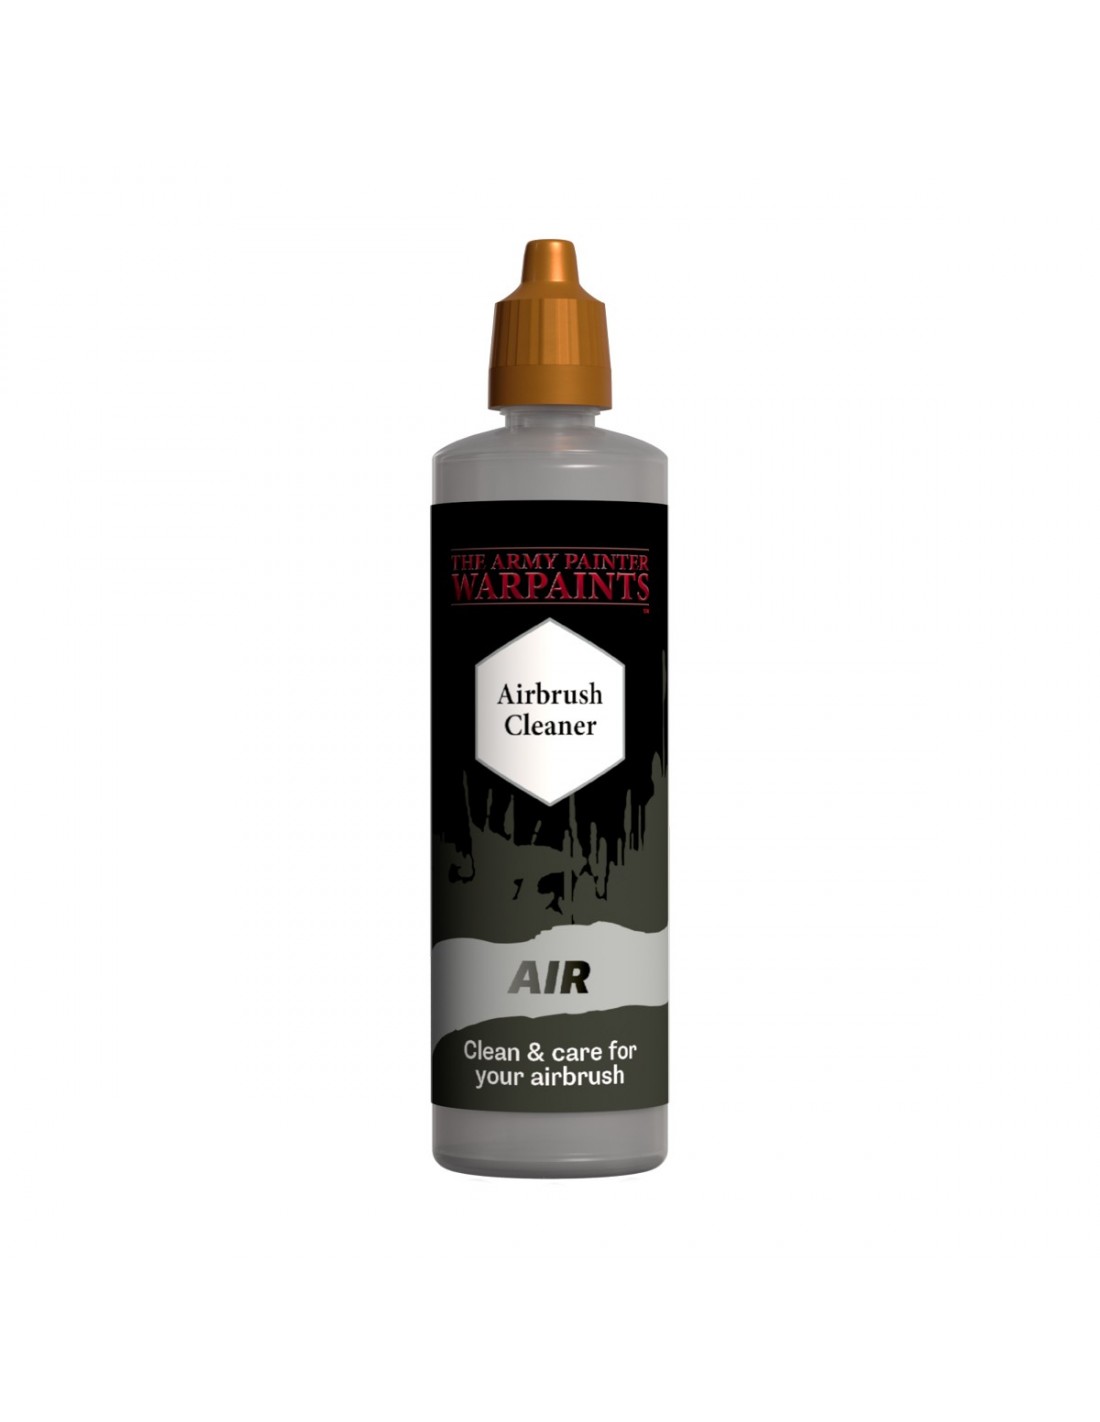 Airbrush Cleaner - Air - 100ml - Warpaints - The Army Painter